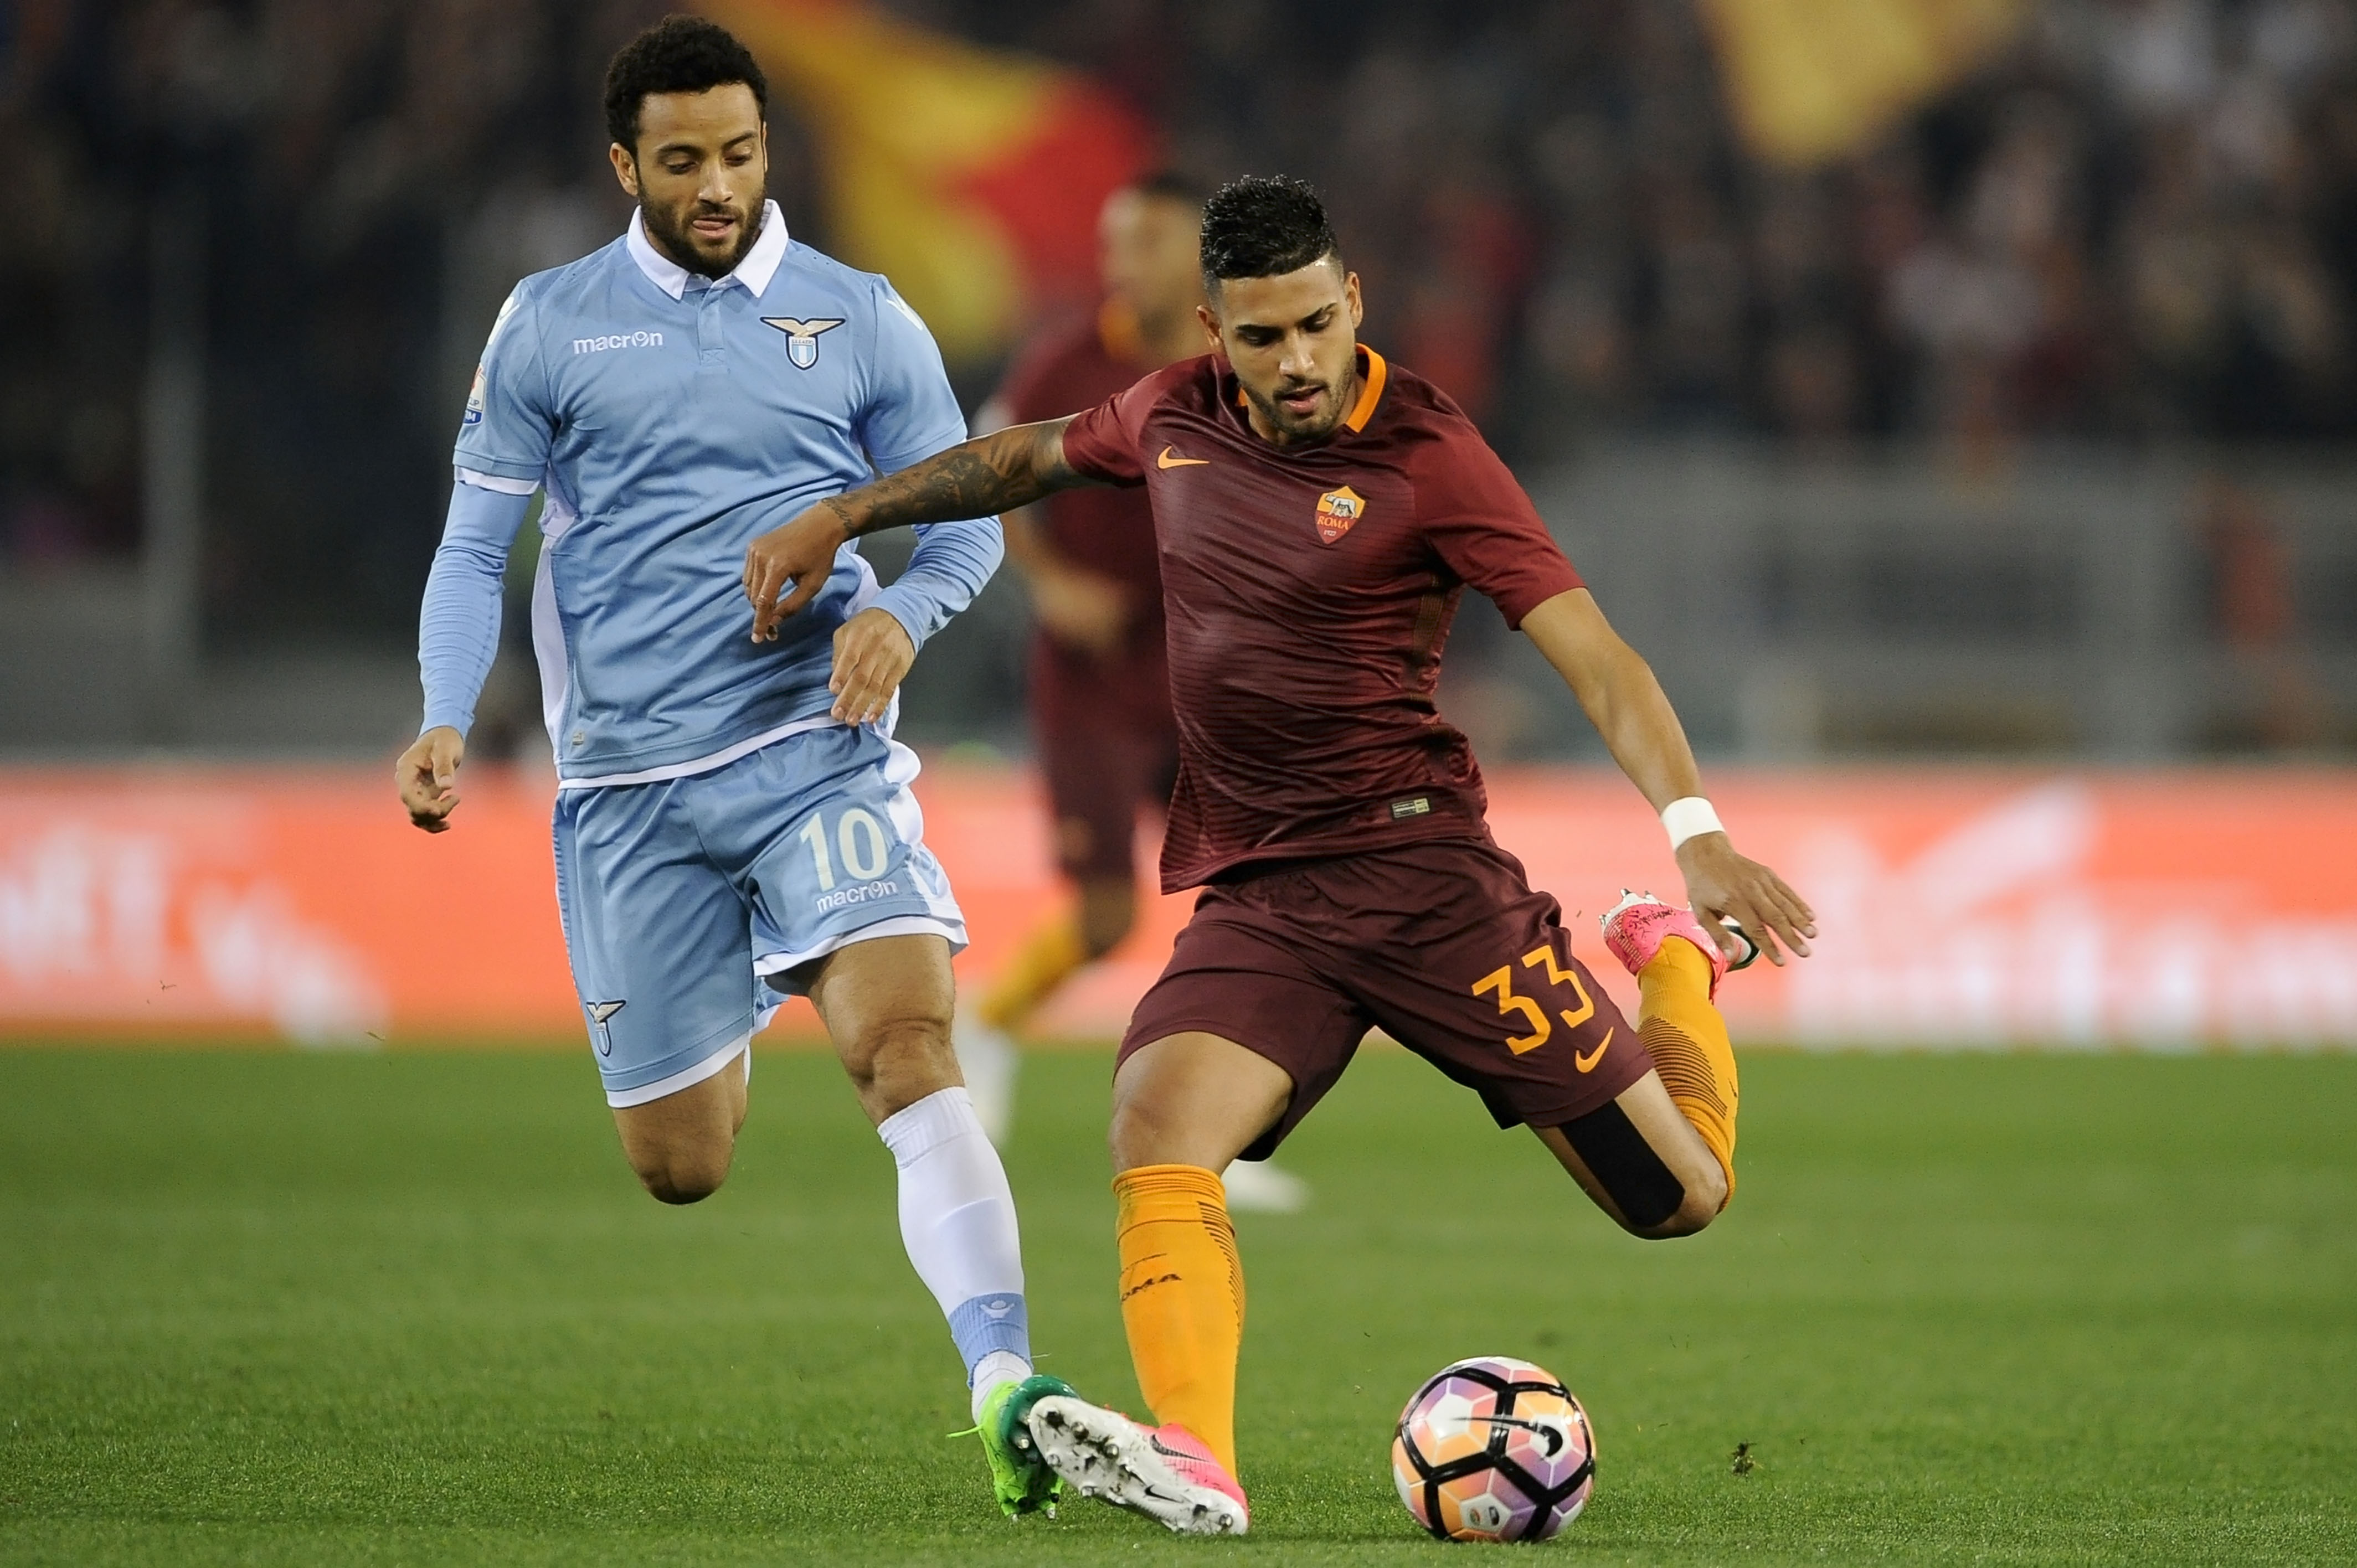 ROME, ROMA - APRIL 04:  Felipe Anderson of SS Lazio battles with Emerson Palmieri of AS Roma during the TIM Cup match between AS Roma and SS Lazio at Stadio Olimpico on April 4, 2017 in Rome, Italy.  (Photo by Marco Rosi/Getty Images)